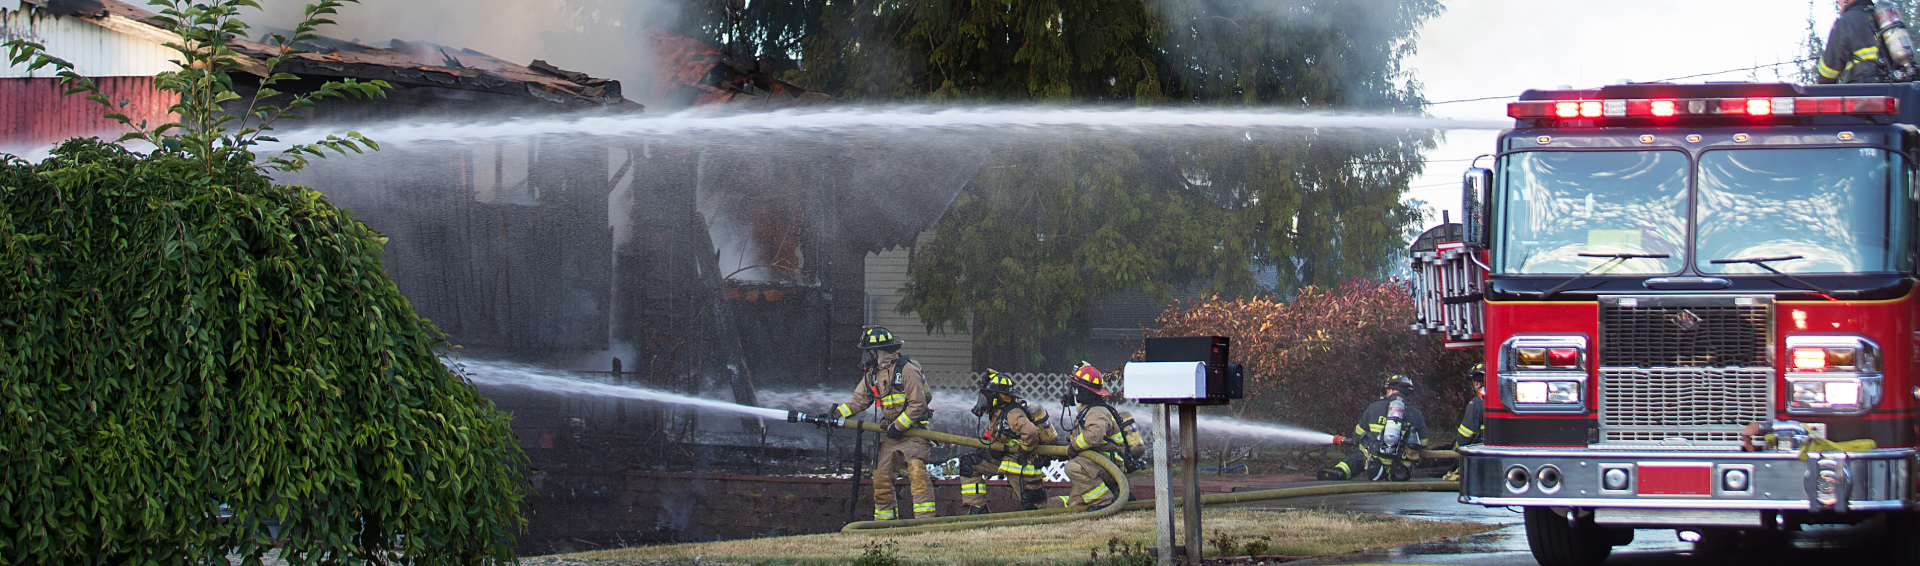 A residential home burns in a house fire as firefighters spay water from a hose in an effort to put it out